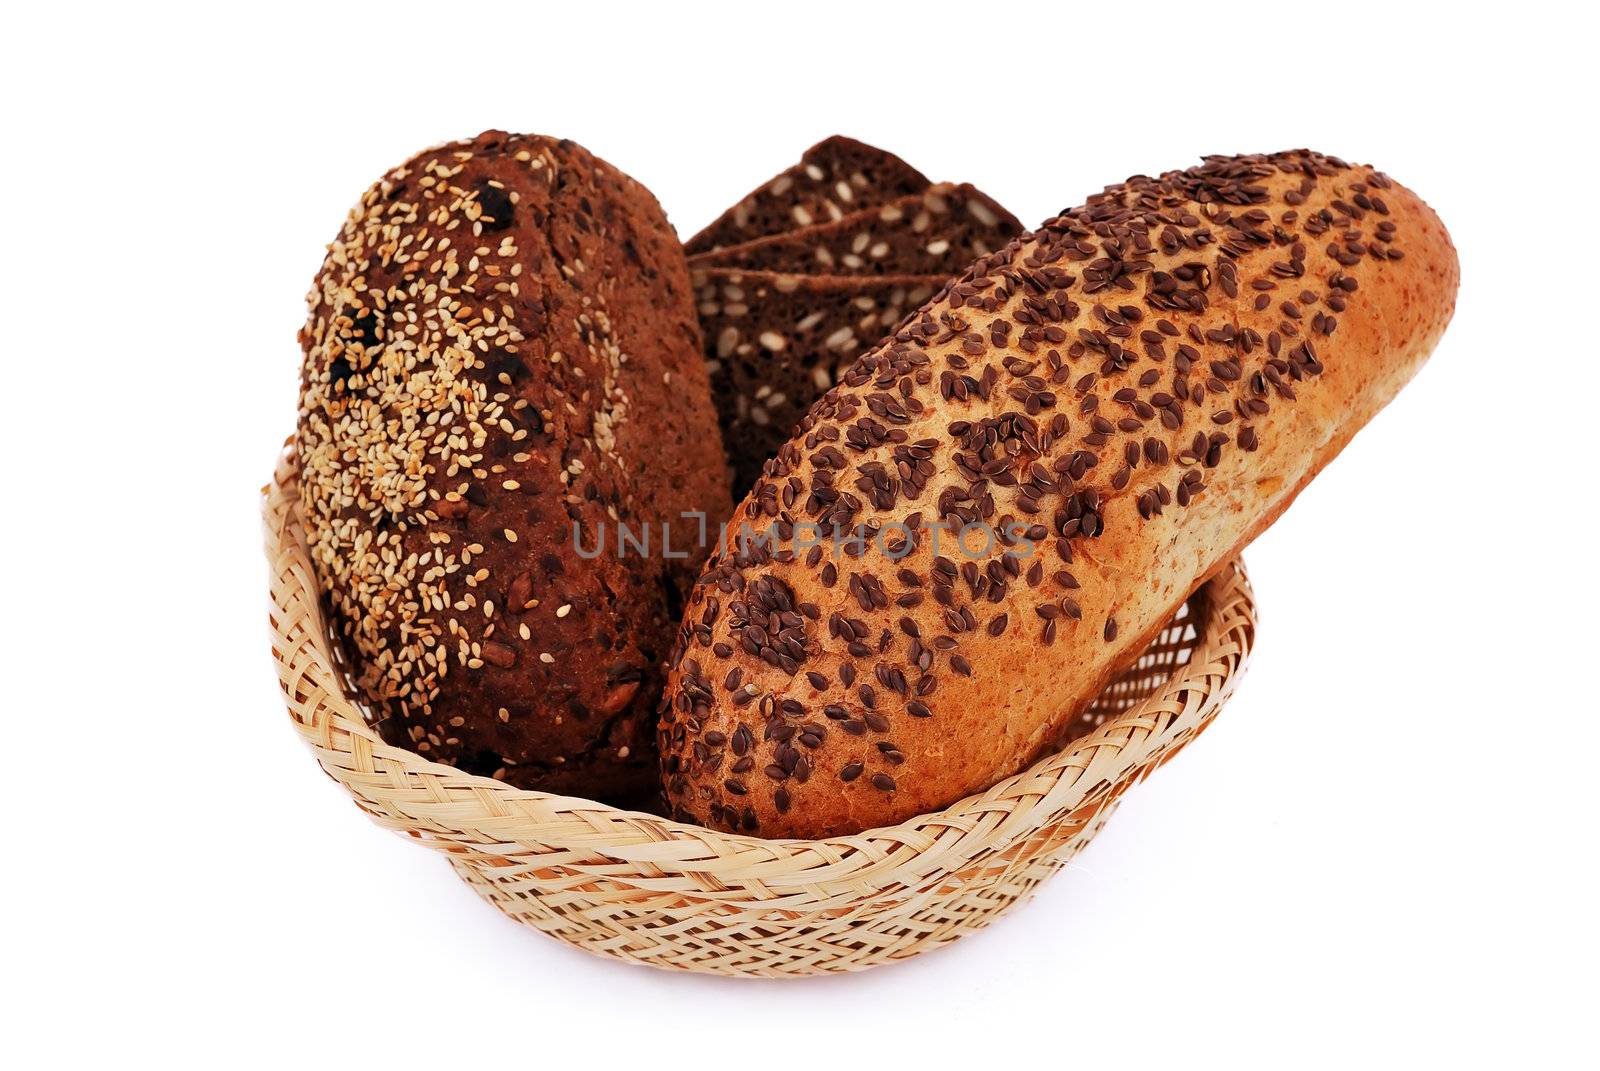 bread with sesame seeds by vetkit